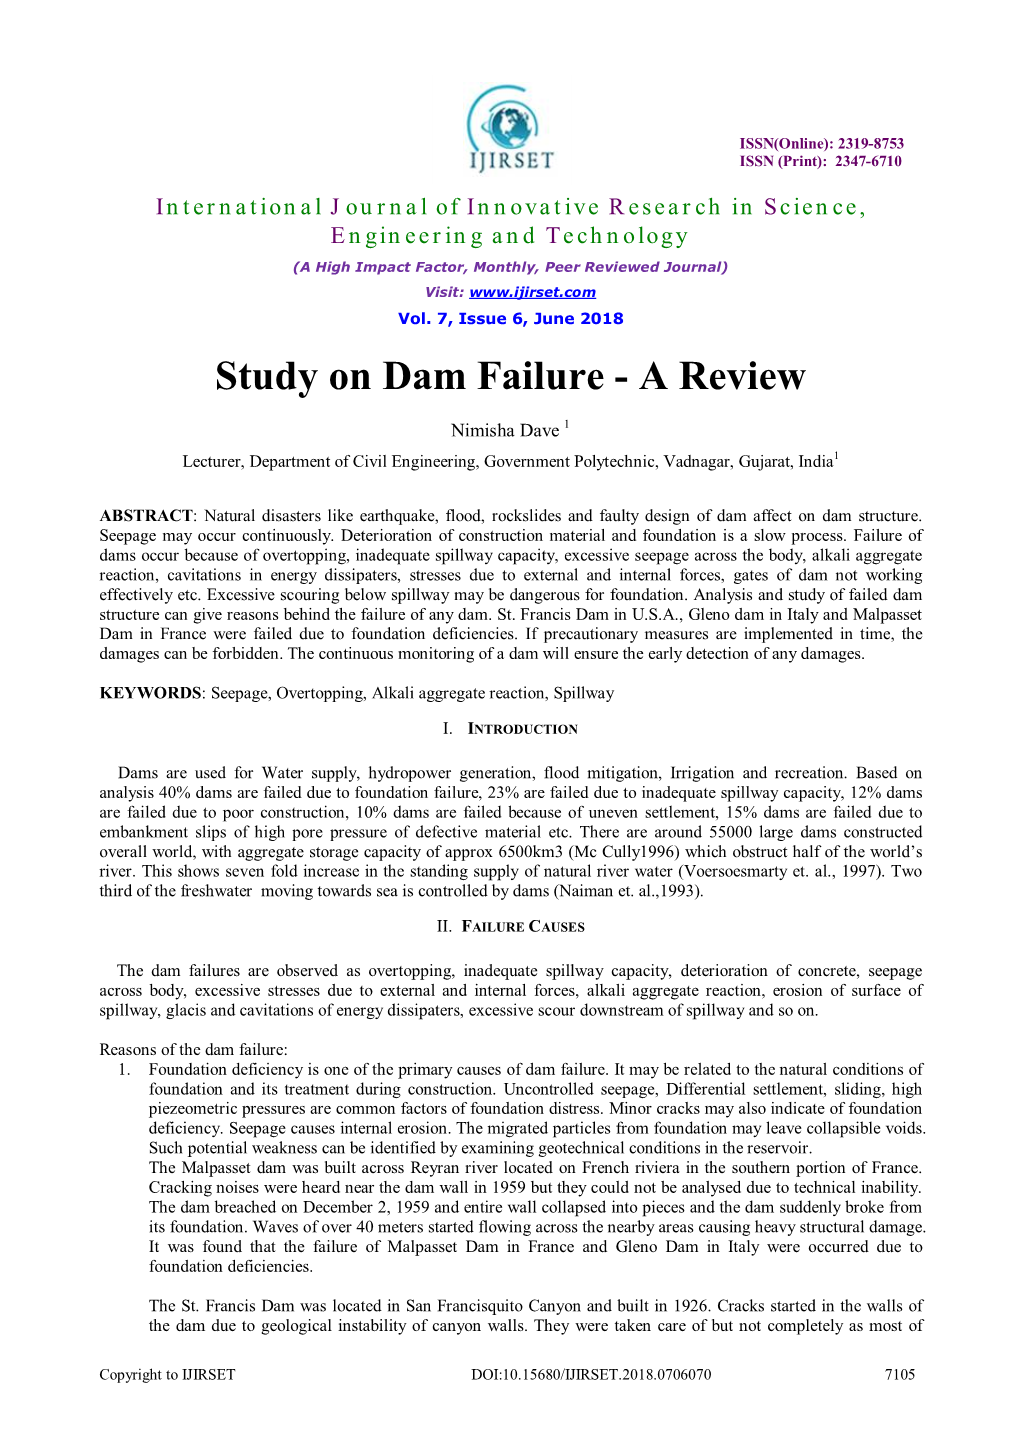 Study on Dam Failure - a Review